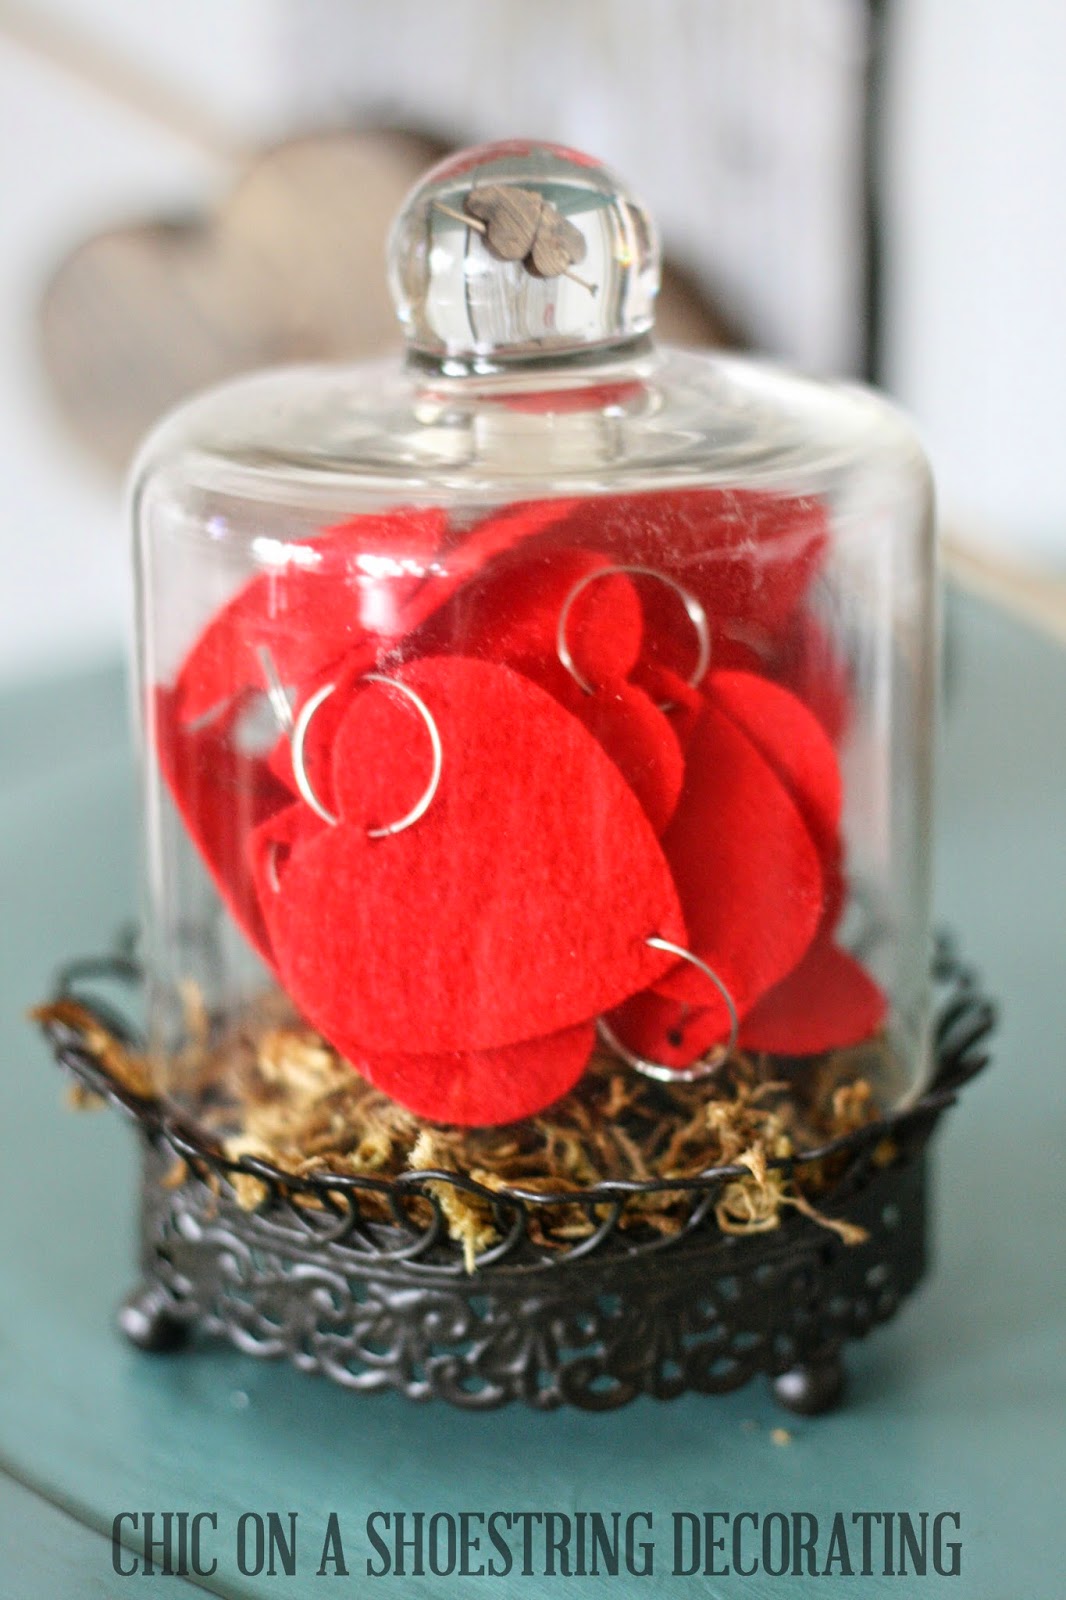 Rustic Chic Valentines Day decor by Chic on a Shoestring Decorating blog